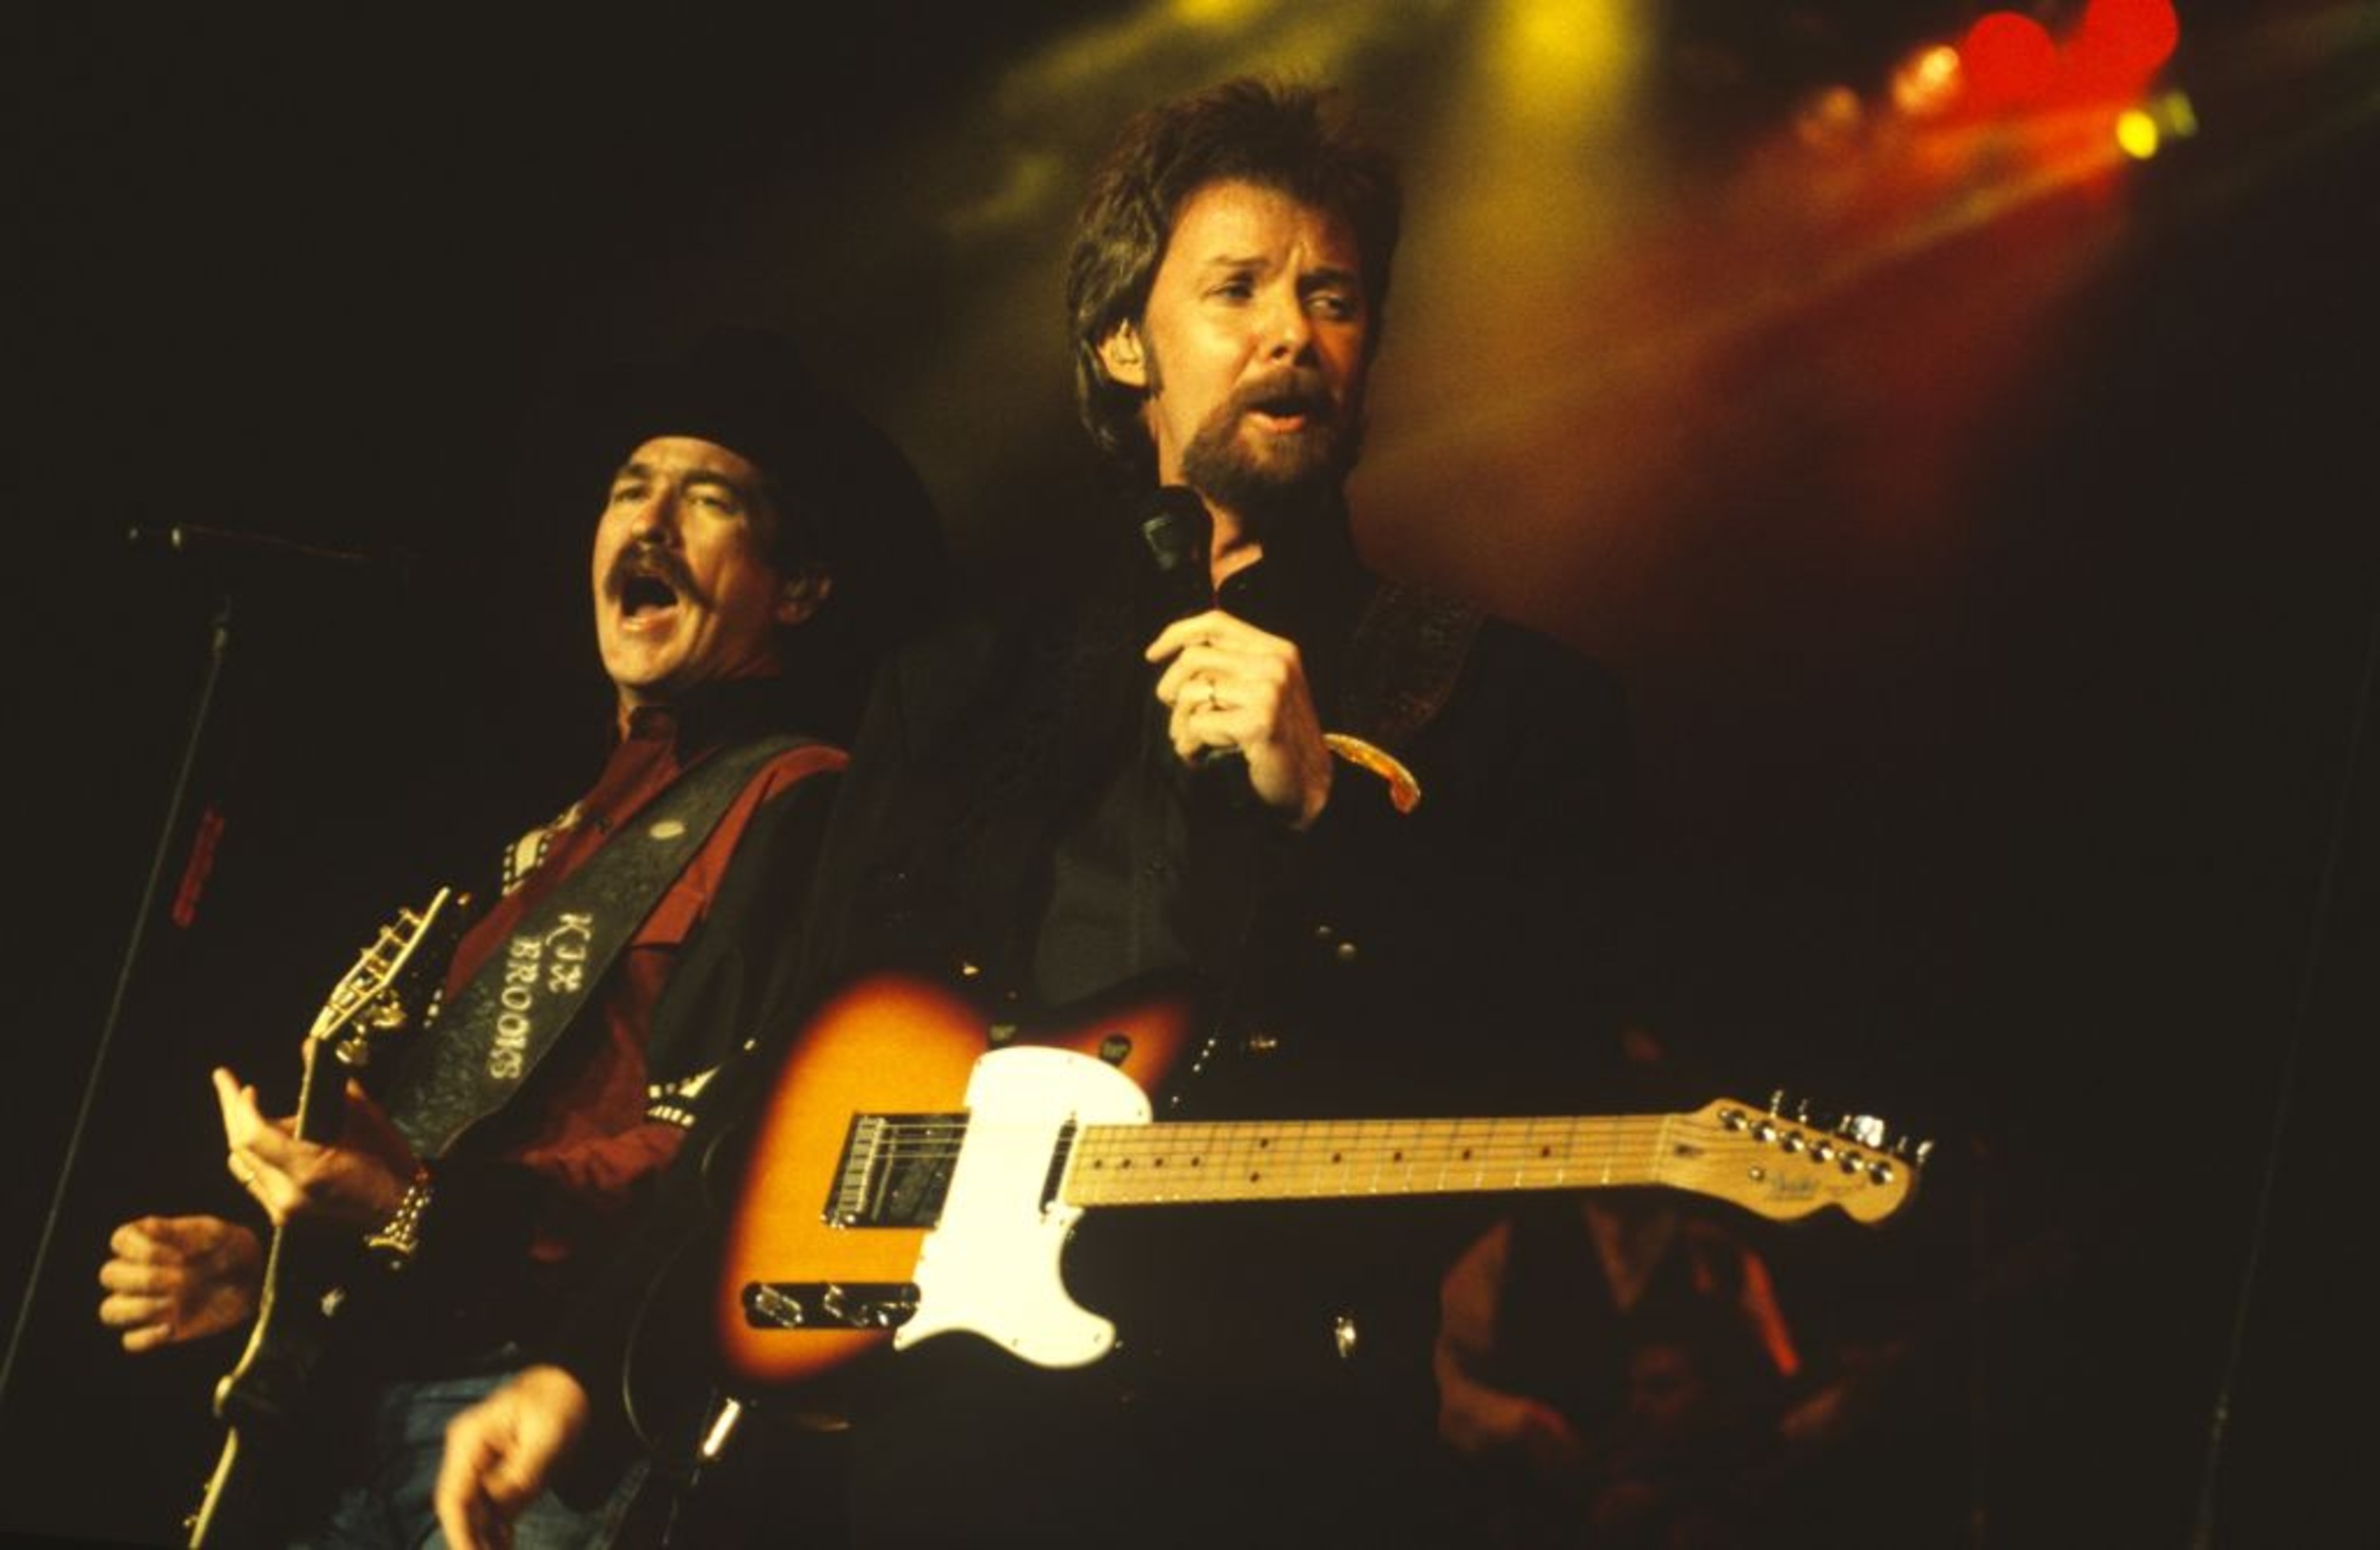 <p>Dig deep into your childhood nostalgia with "Red Dirt Road," a song that's all about reliving those memories of driving around on backroads in the past, from legendary '90s duo Brooks & Dunn. </p><p><a href='https://www.msn.com/en-us/community/channel/vid-cj9pqbr0vn9in2b6ddcd8sfgpfq6x6utp44fssrv6mc2gtybw0us'>Follow us on MSN to see more of our exclusive entertainment content.</a></p>